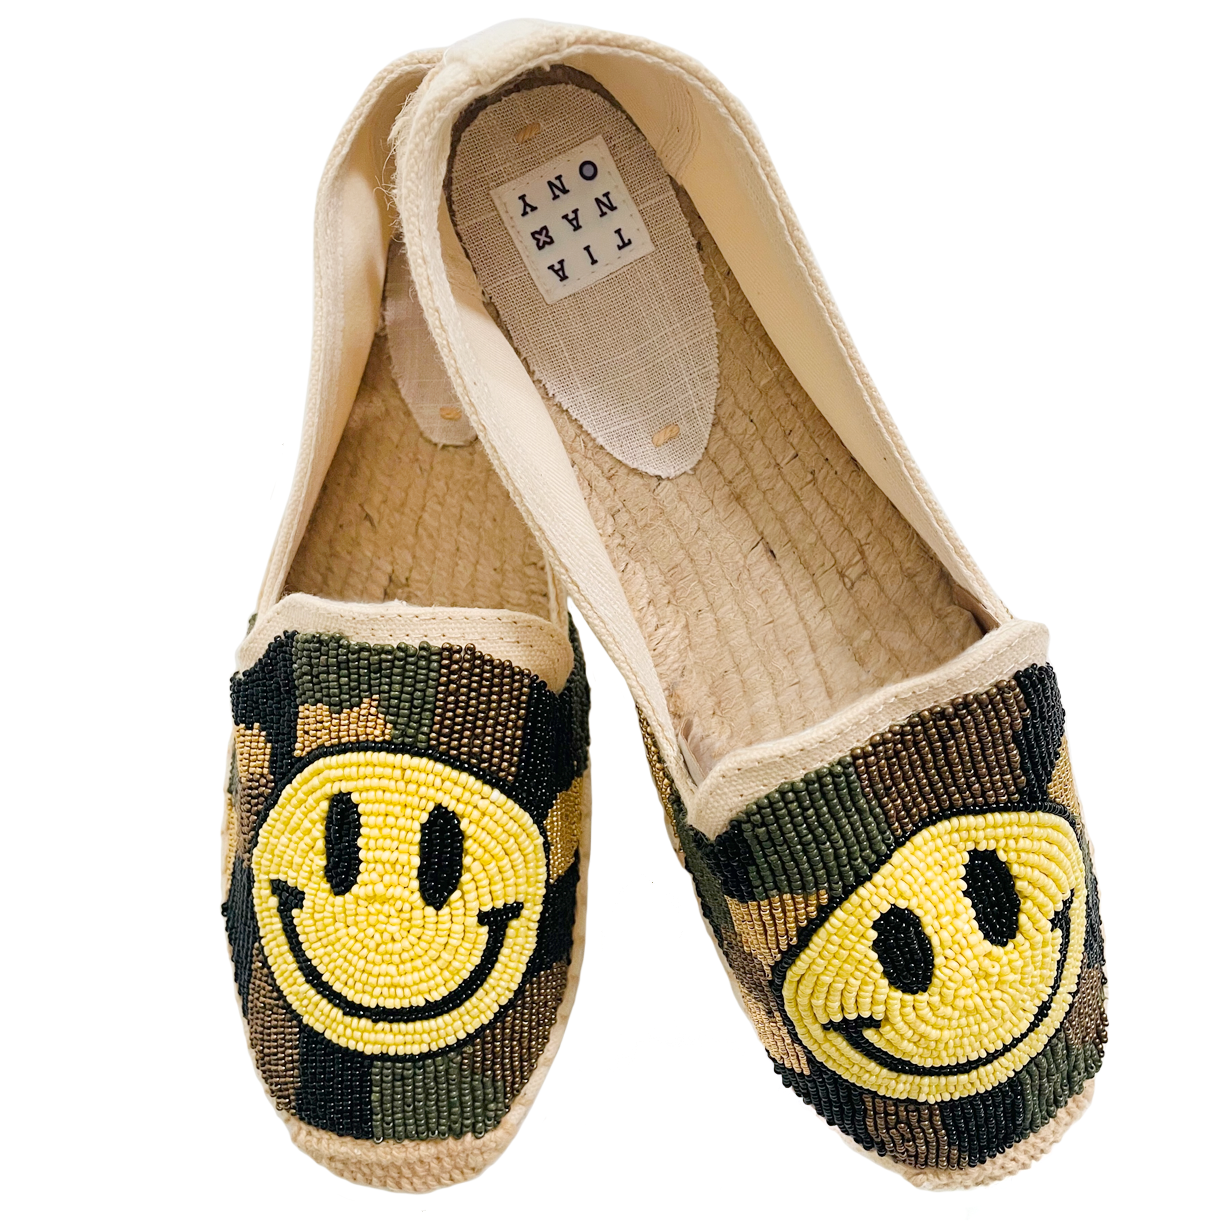 Smiley Beaded Espadrilles, RSVP Style - RSVP Style